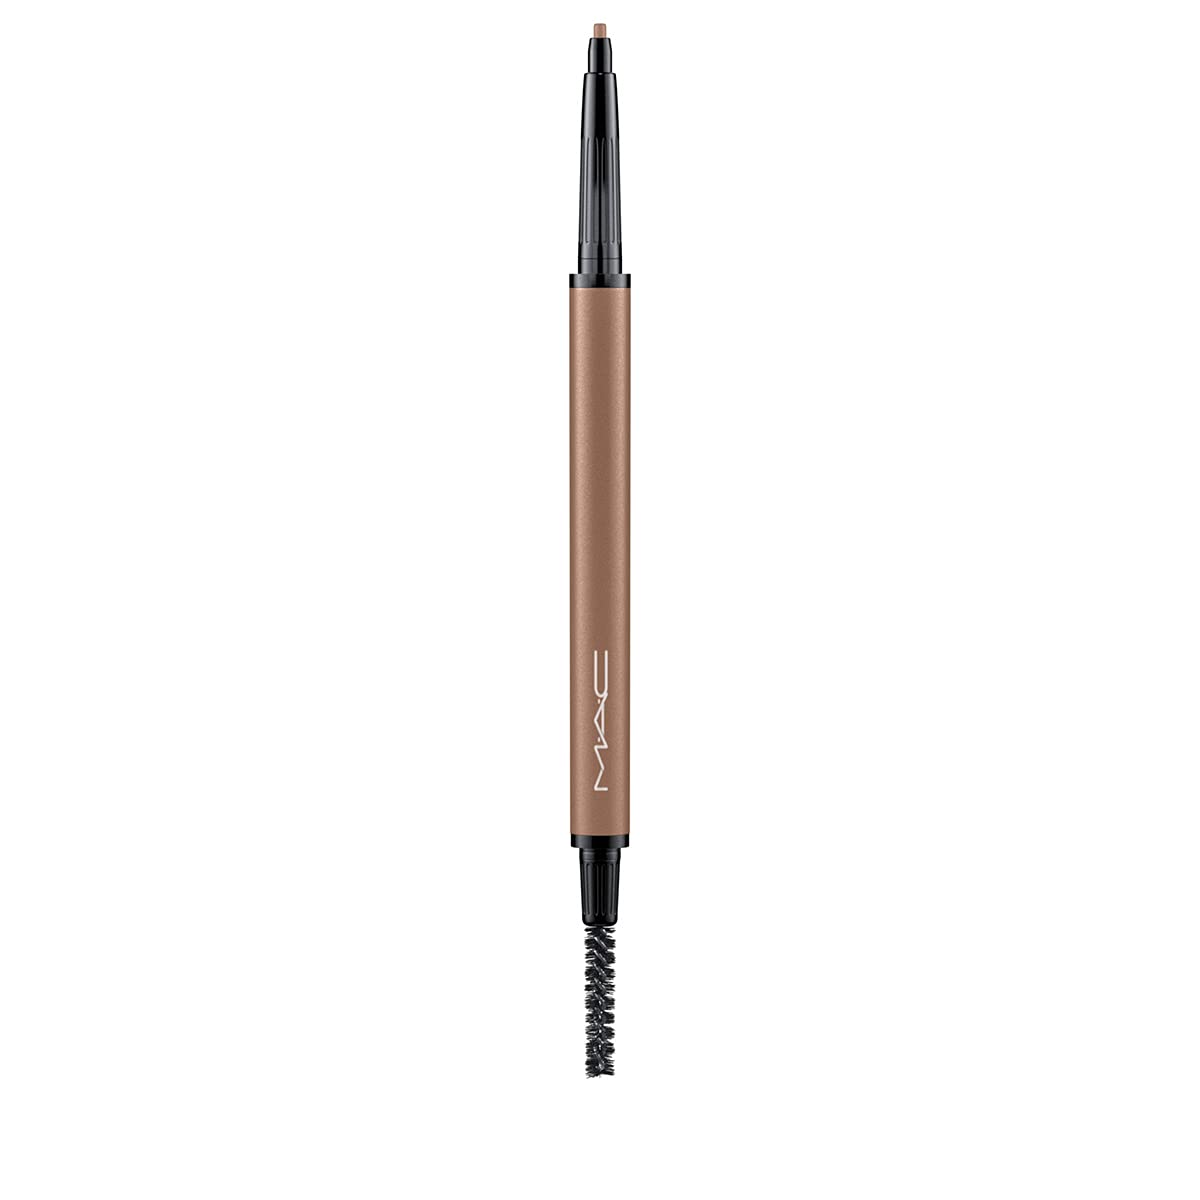 MA'C Eyebrows Styler Lingering 0.03 , clear